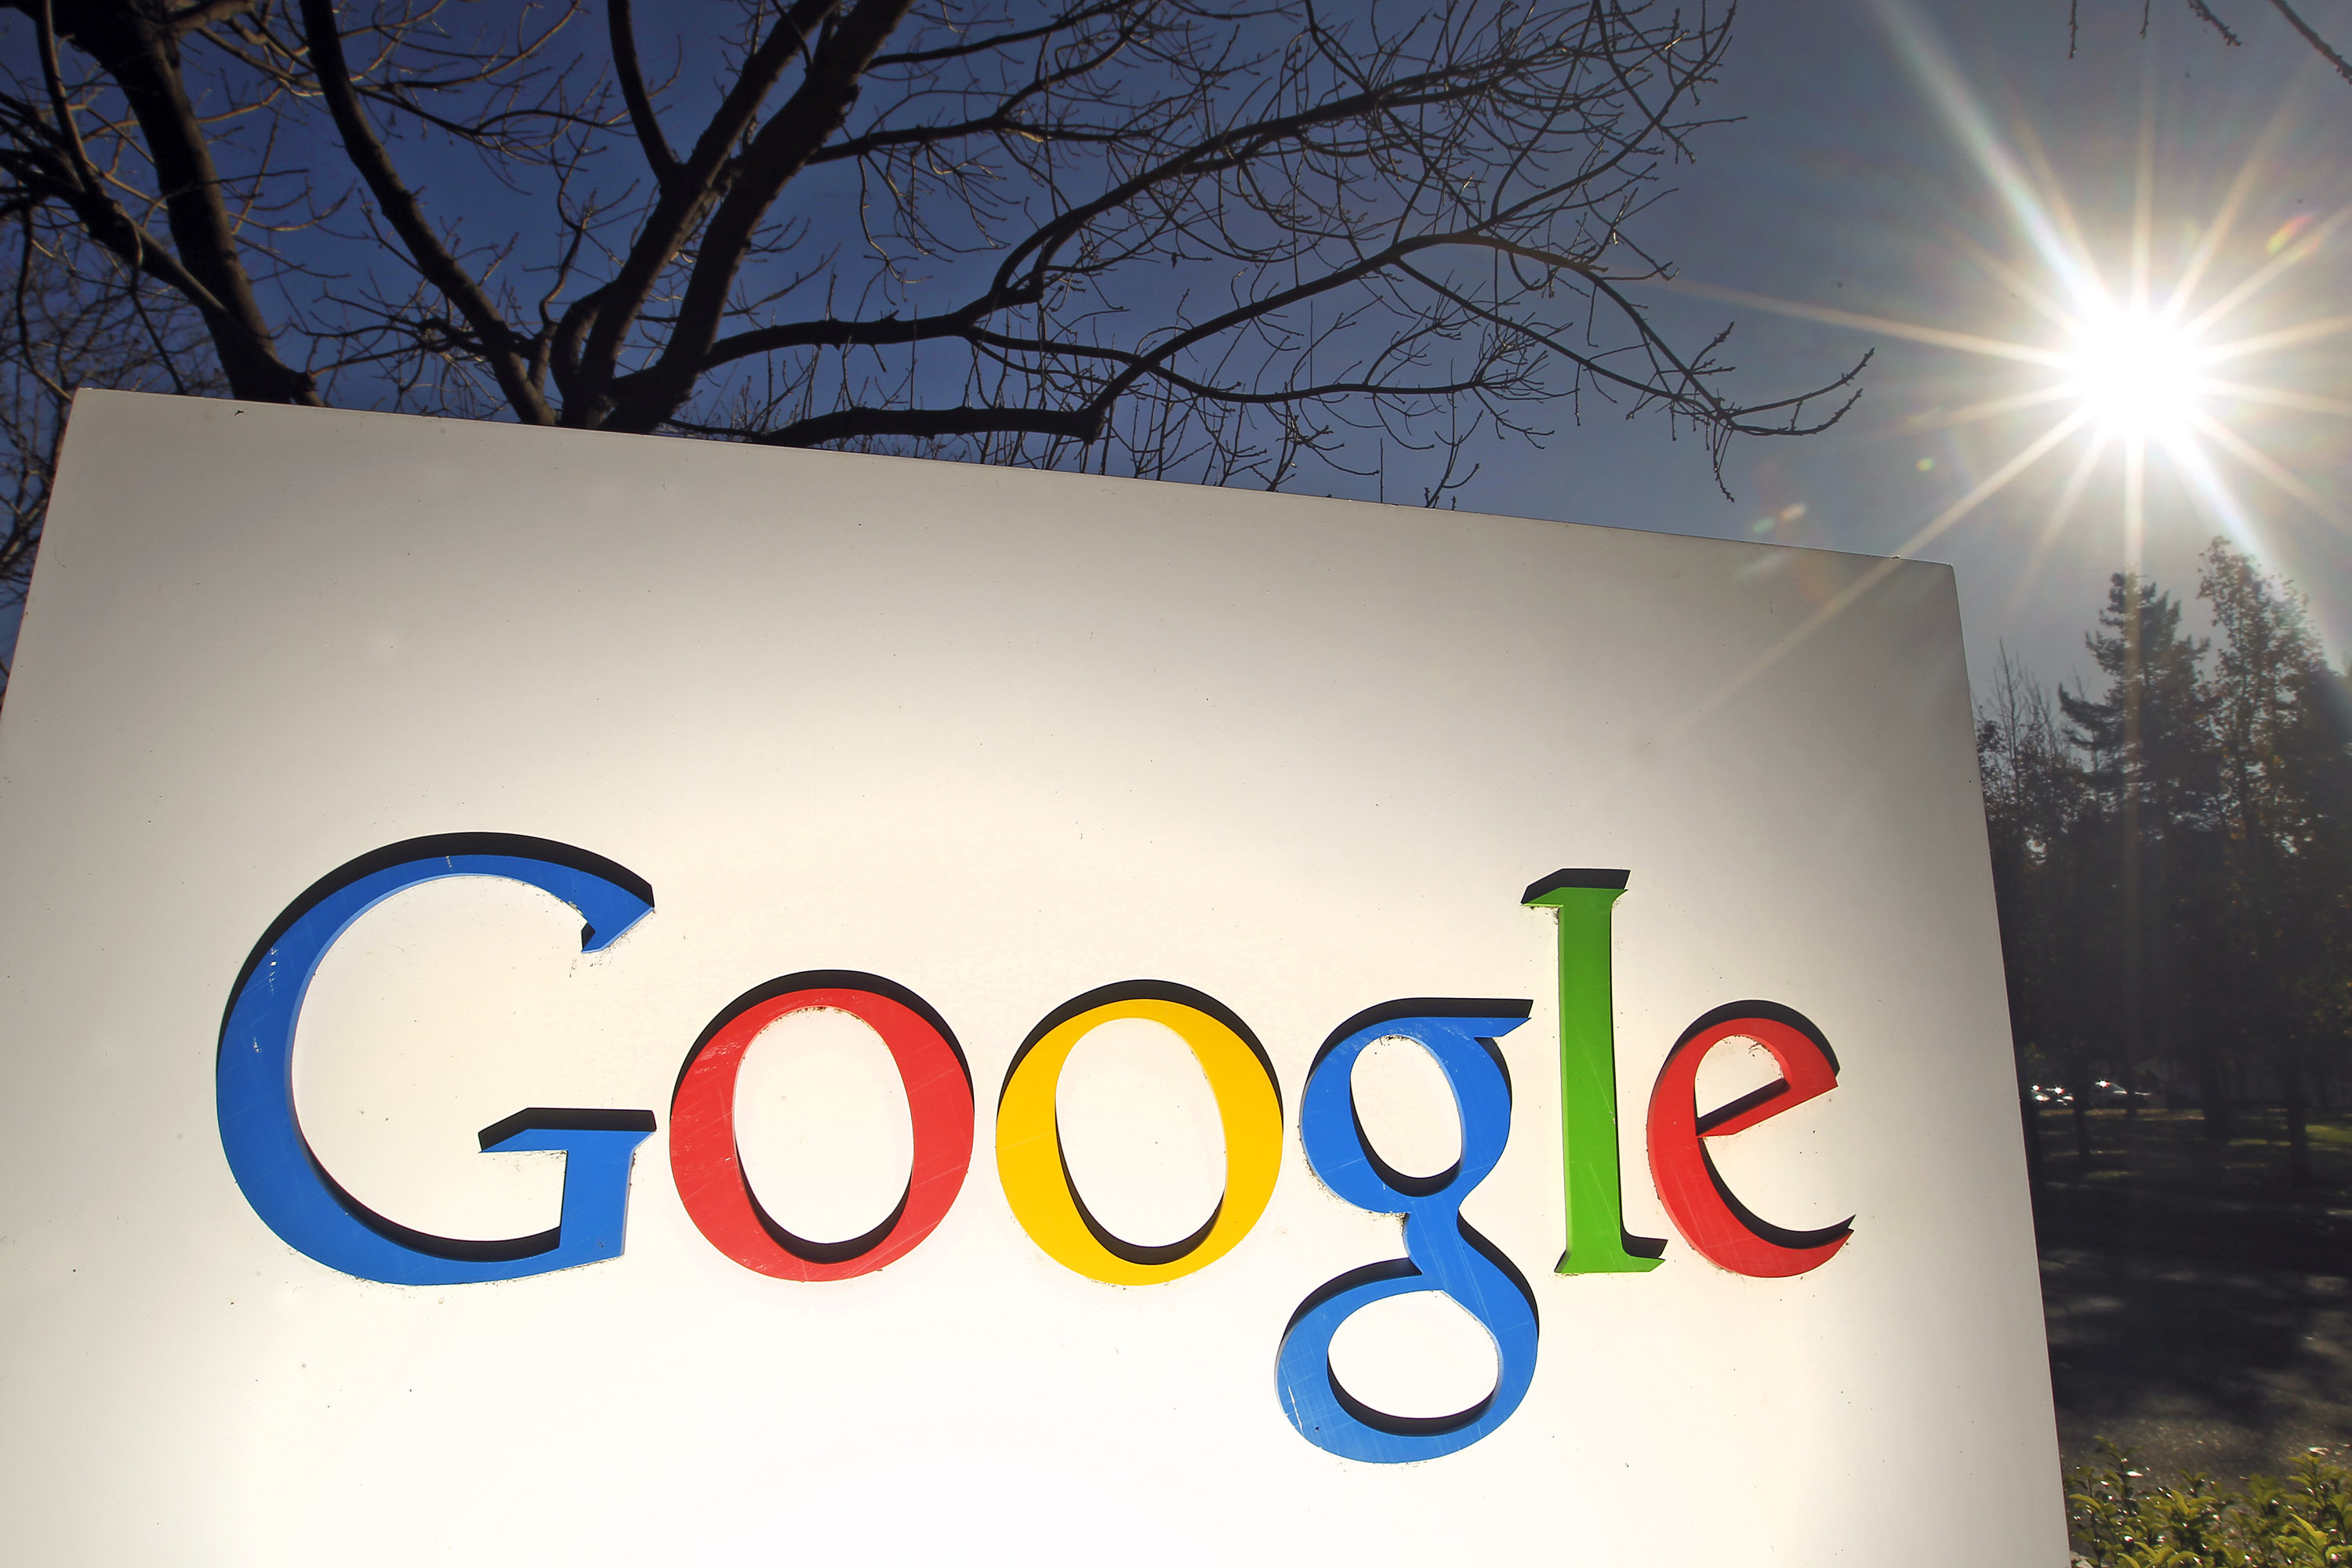 Signage is displayed at the Google Inc. headquarters in Mountain View, California, U.S., on Jan. 25, 2011.
